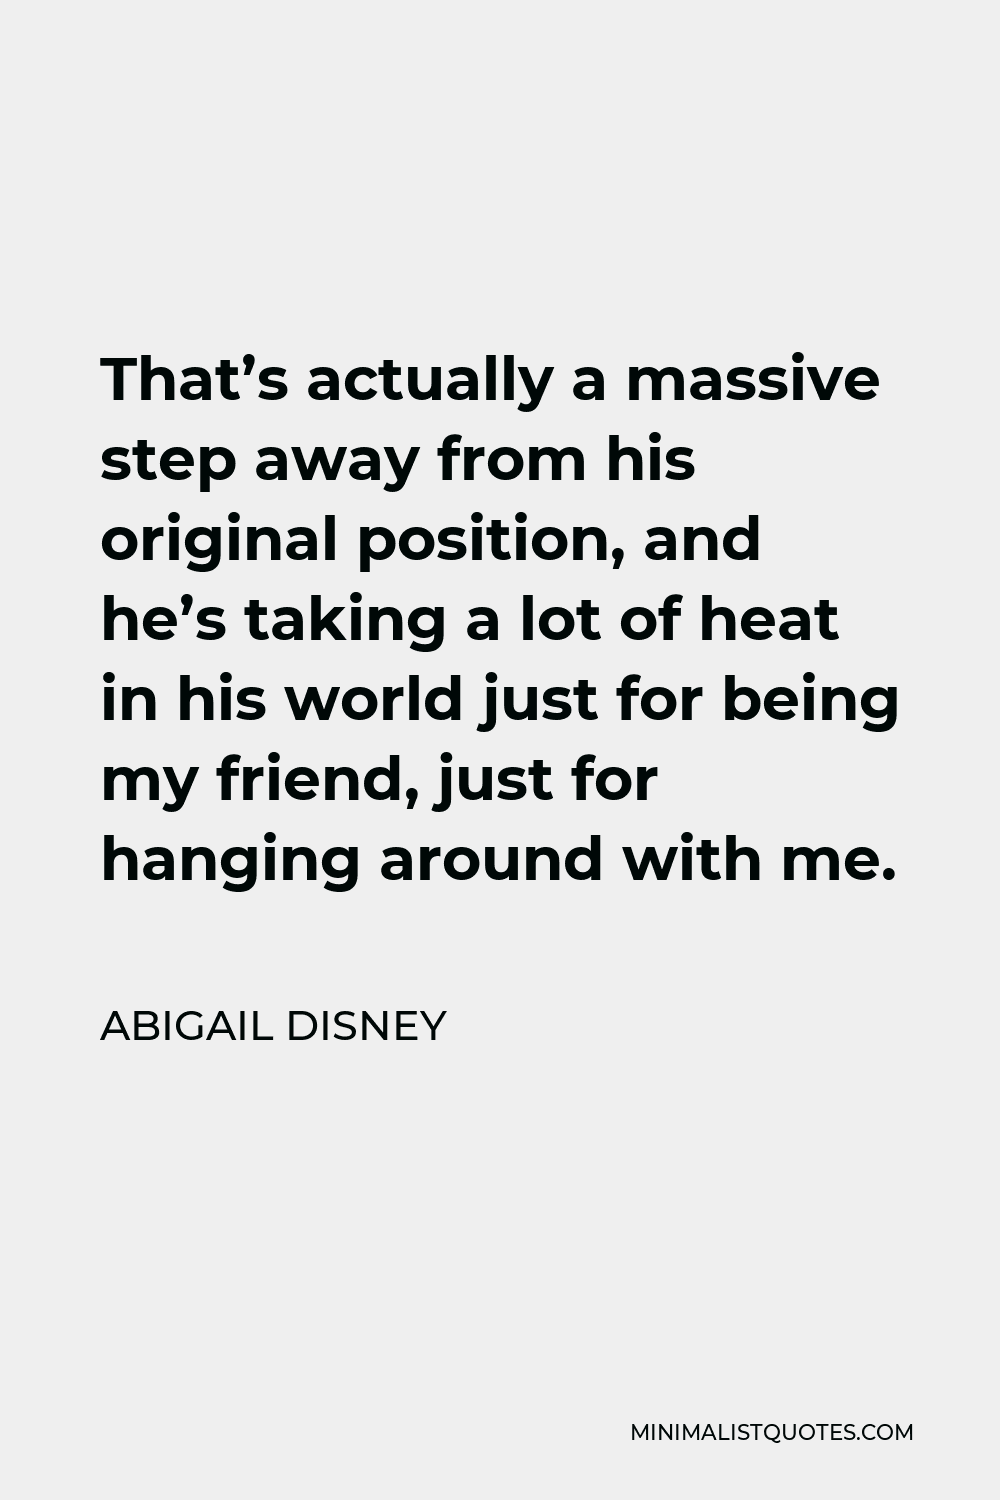 Abigail Disney Quote - That’s actually a massive step away from his original position, and he’s taking a lot of heat in his world just for being my friend, just for hanging around with me.